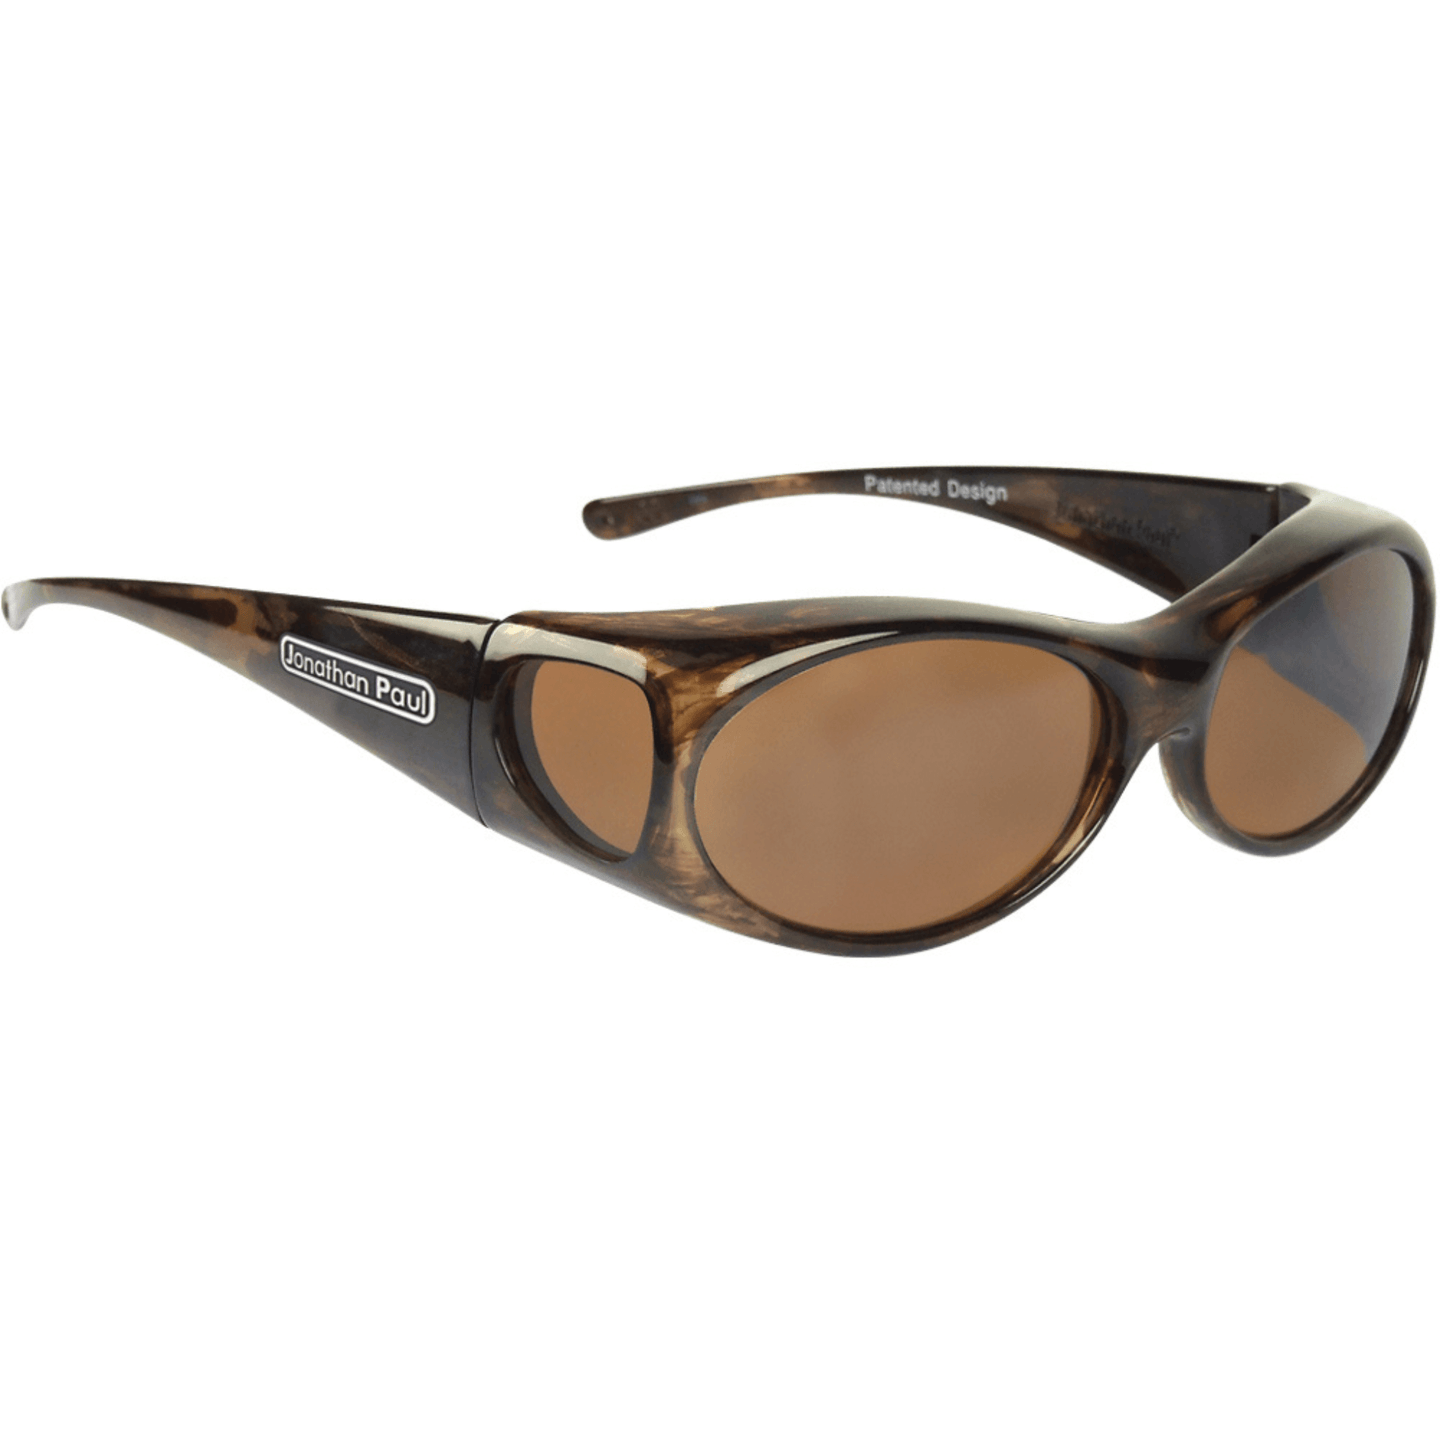 Fitover Sunglasses 'Aurora' Brown Marble - Amber Lens